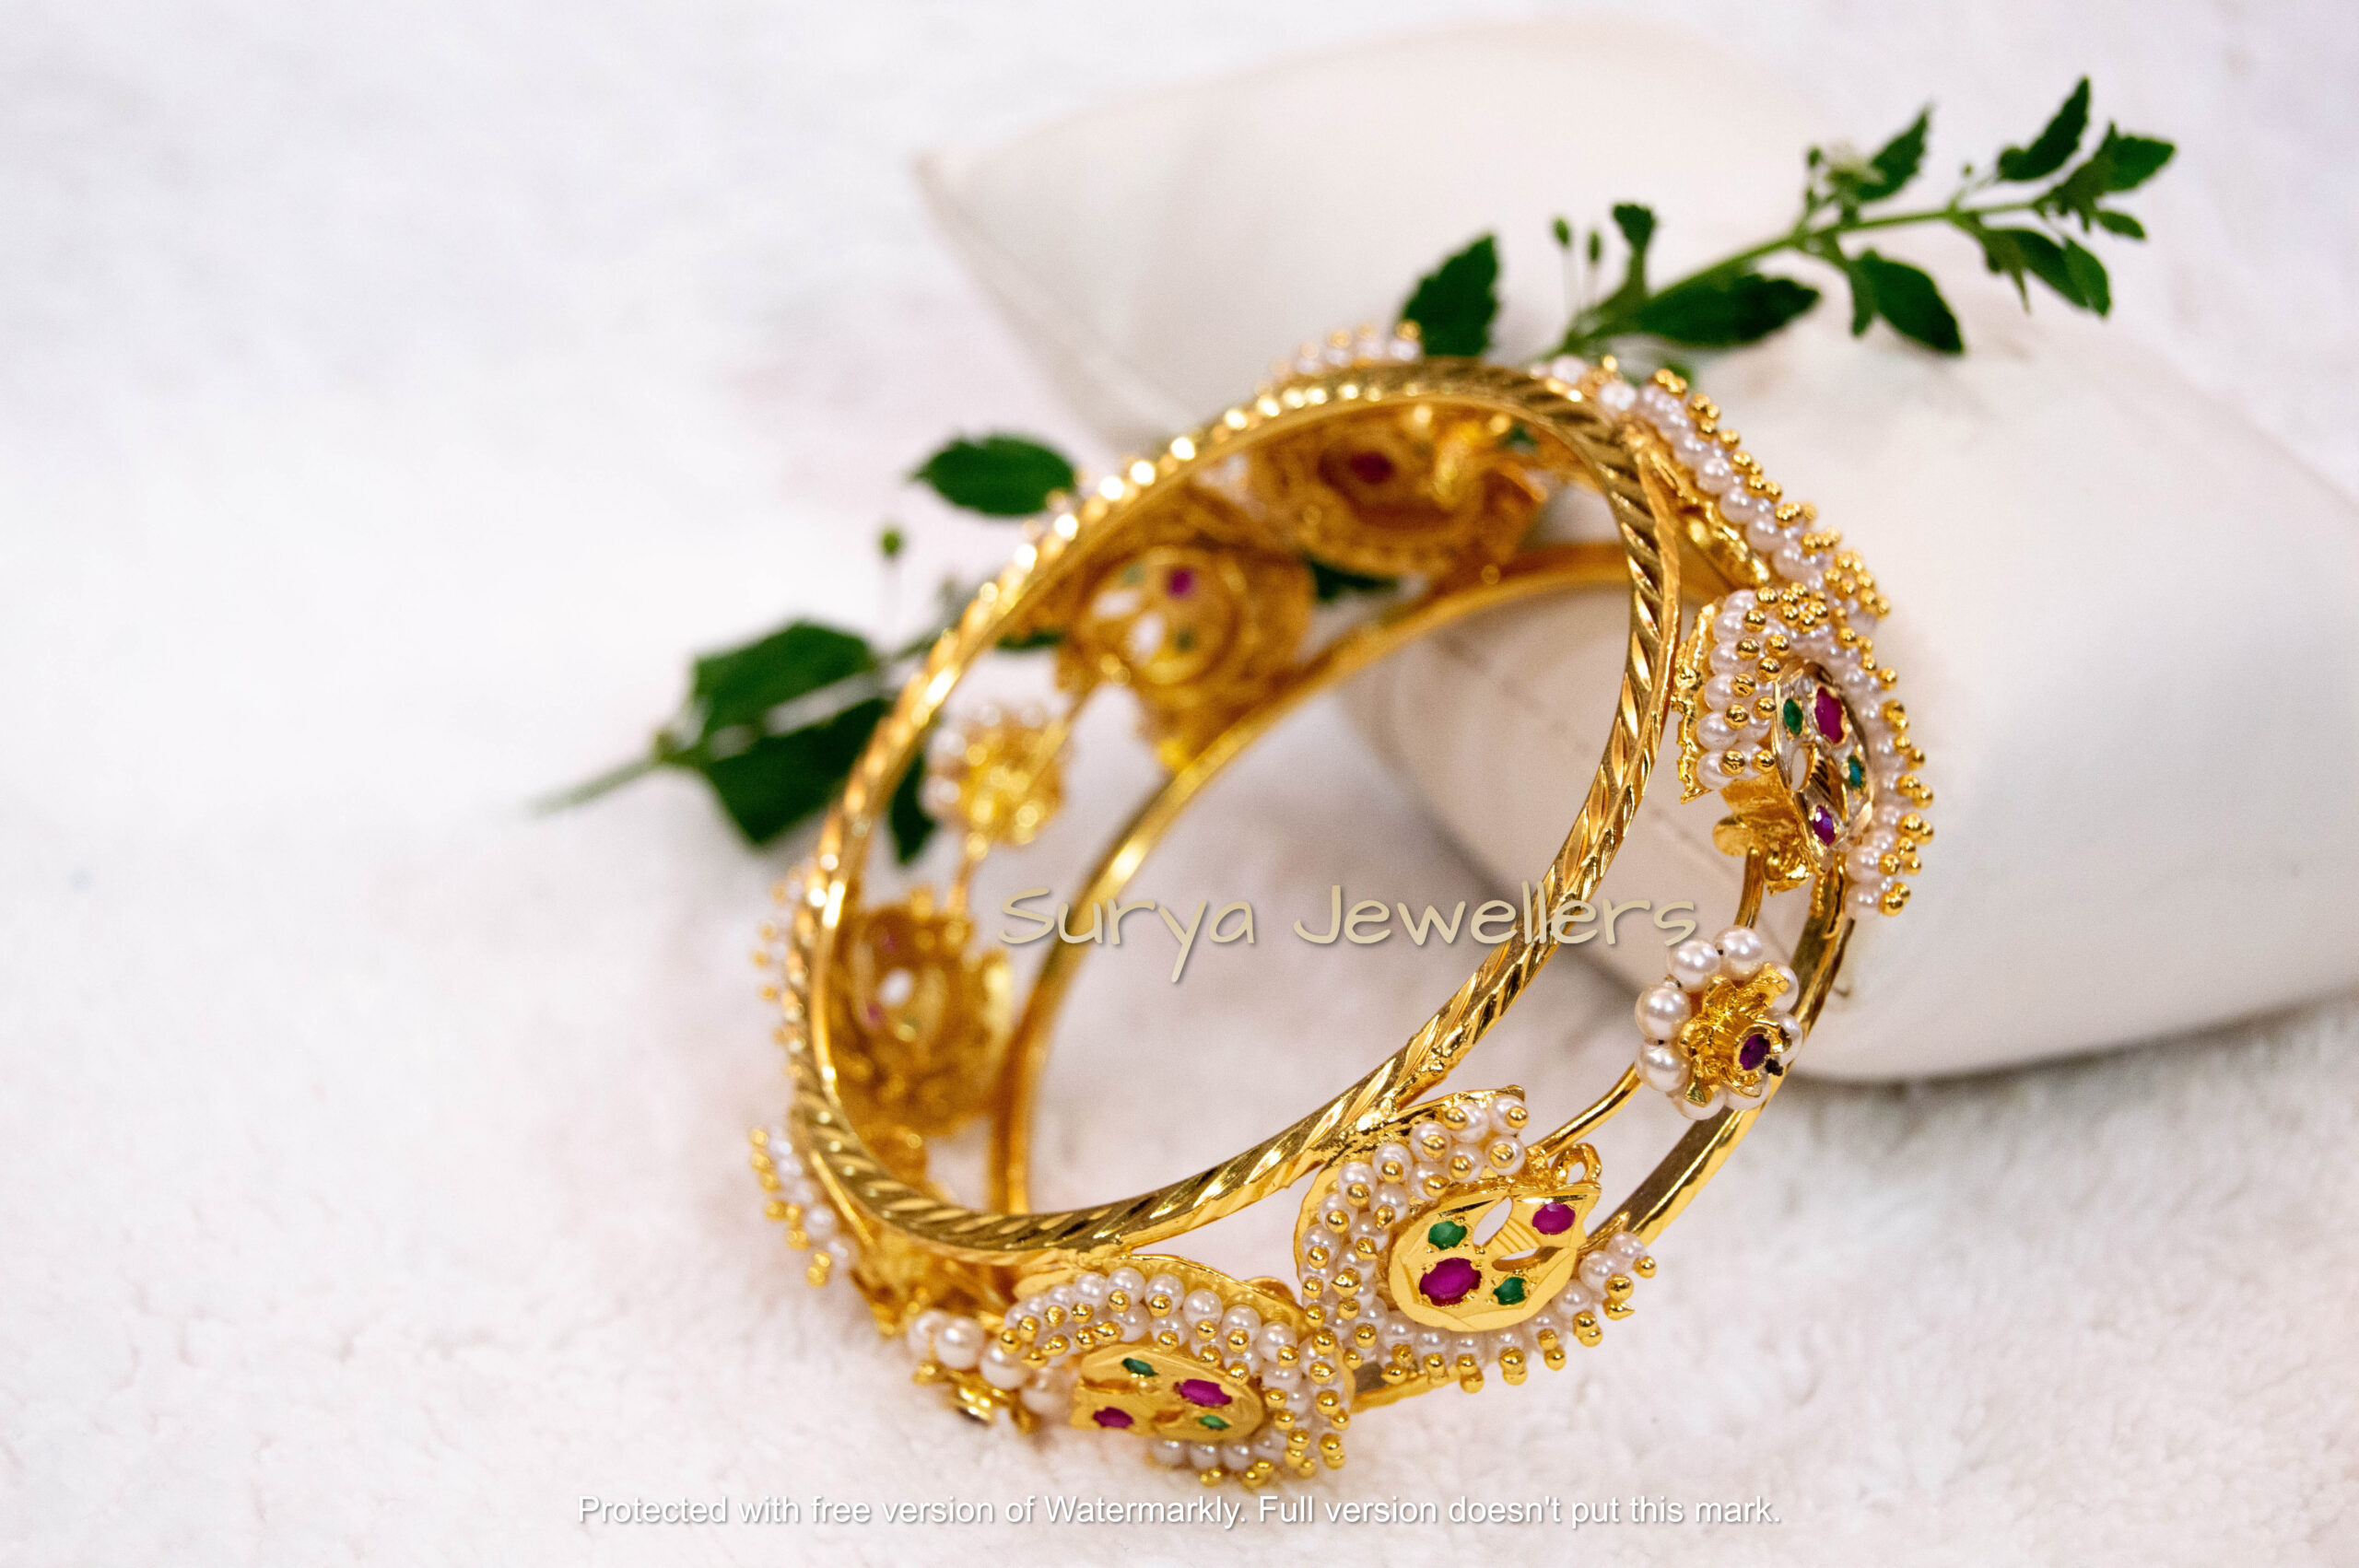 Surya Jewellers – Ultimate choice in gold plated jewellery